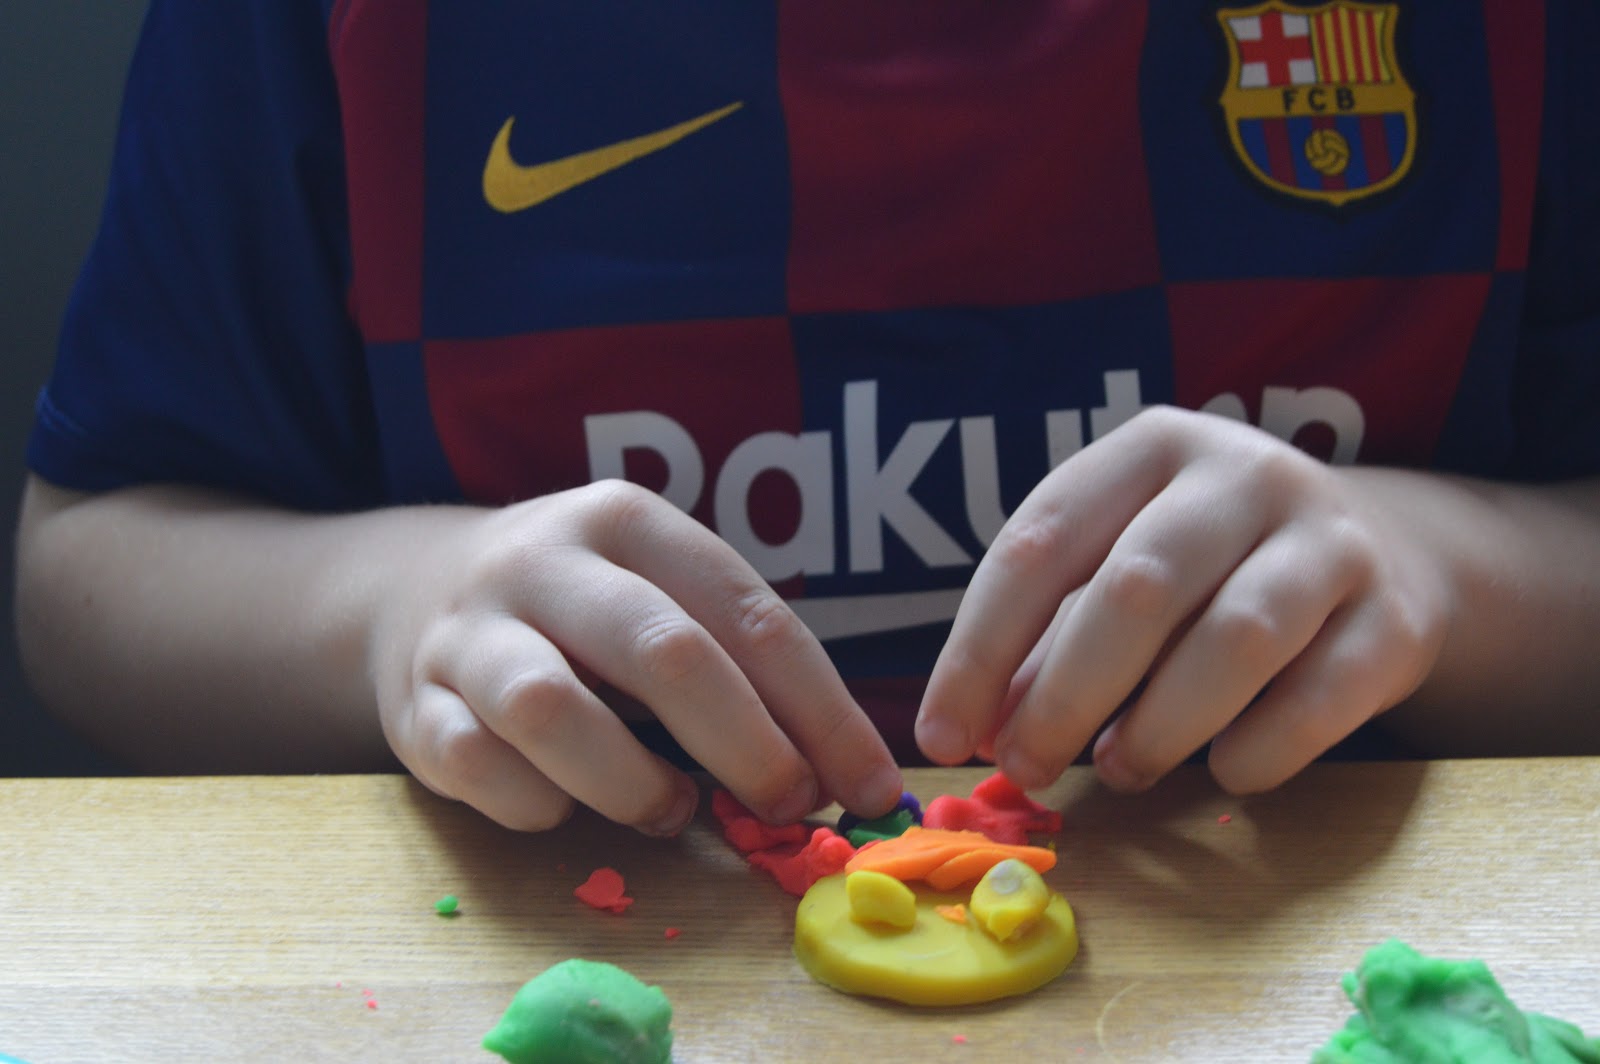 playing with playdough